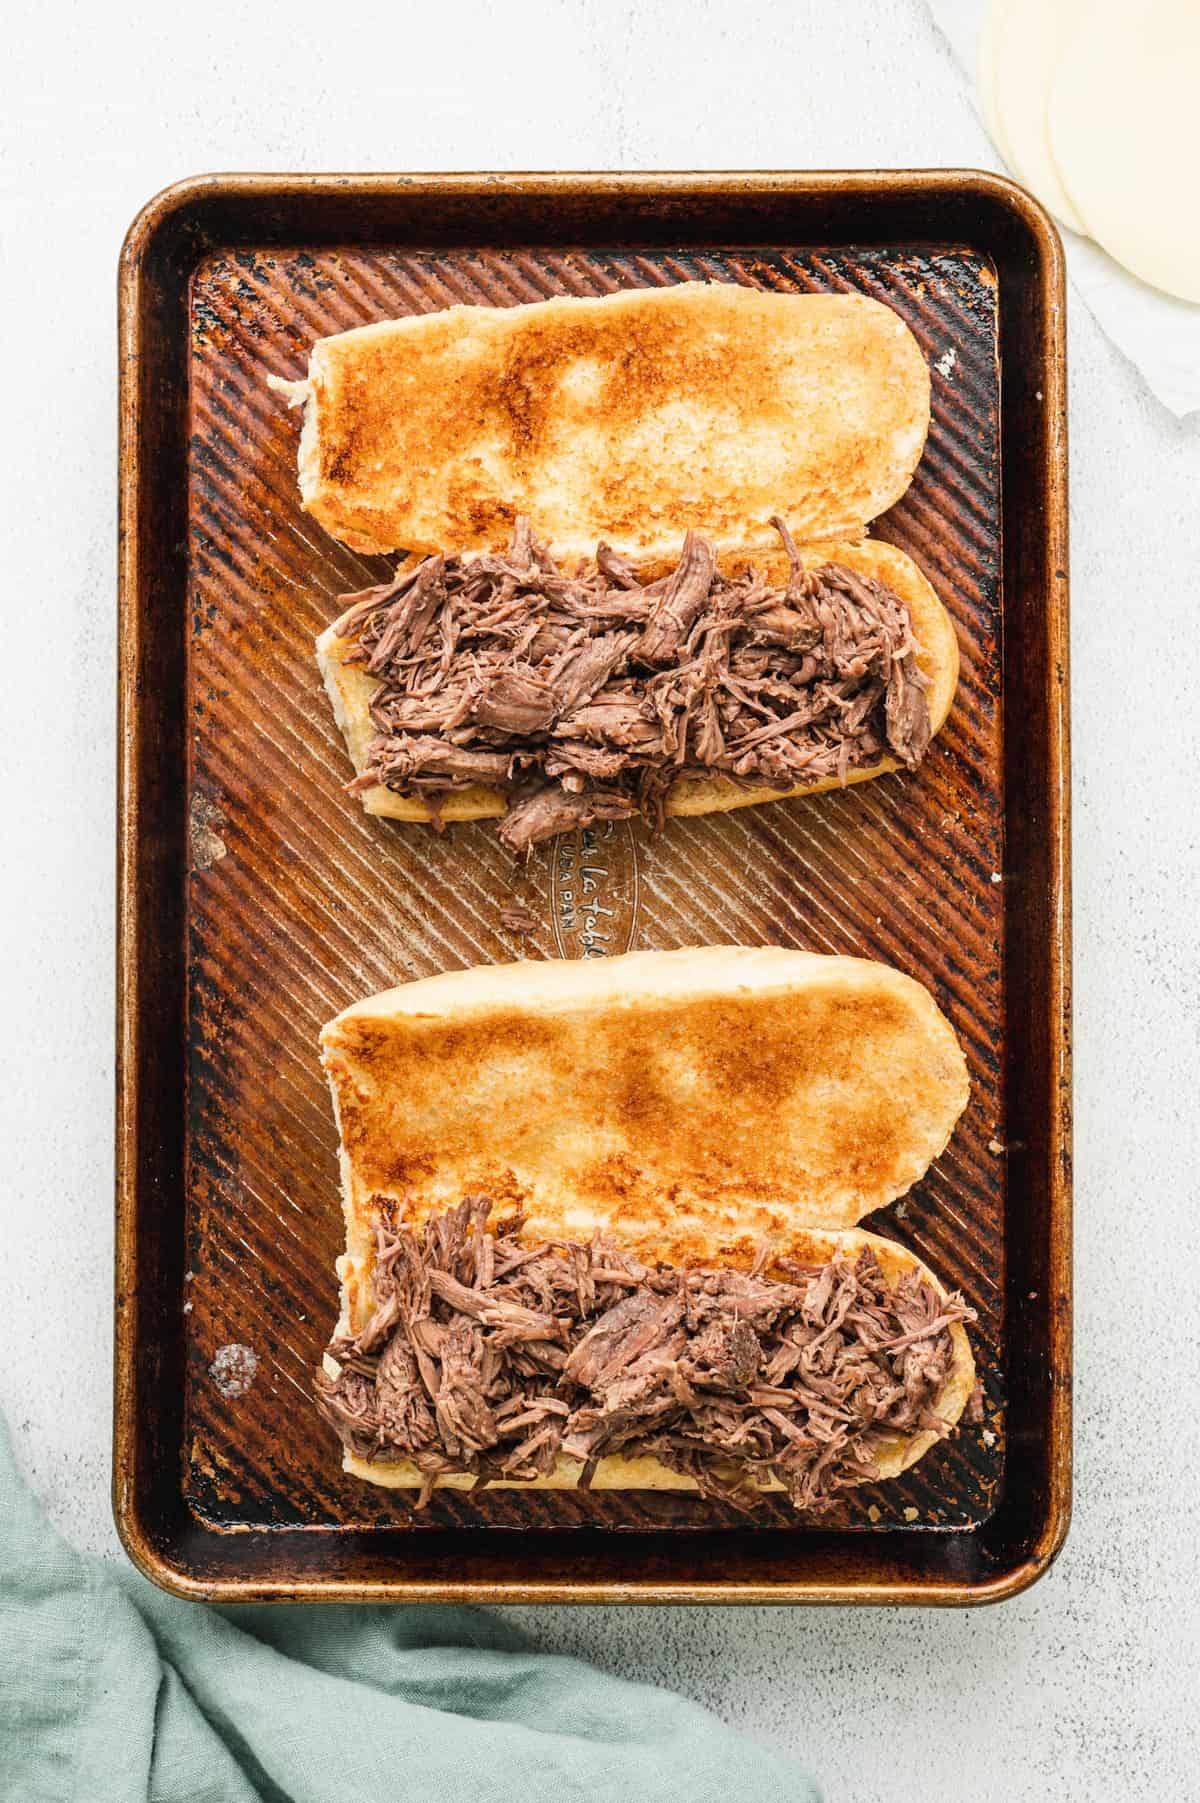 Adding shredded seasoned beef to open faced toasted hoagies for French Dip